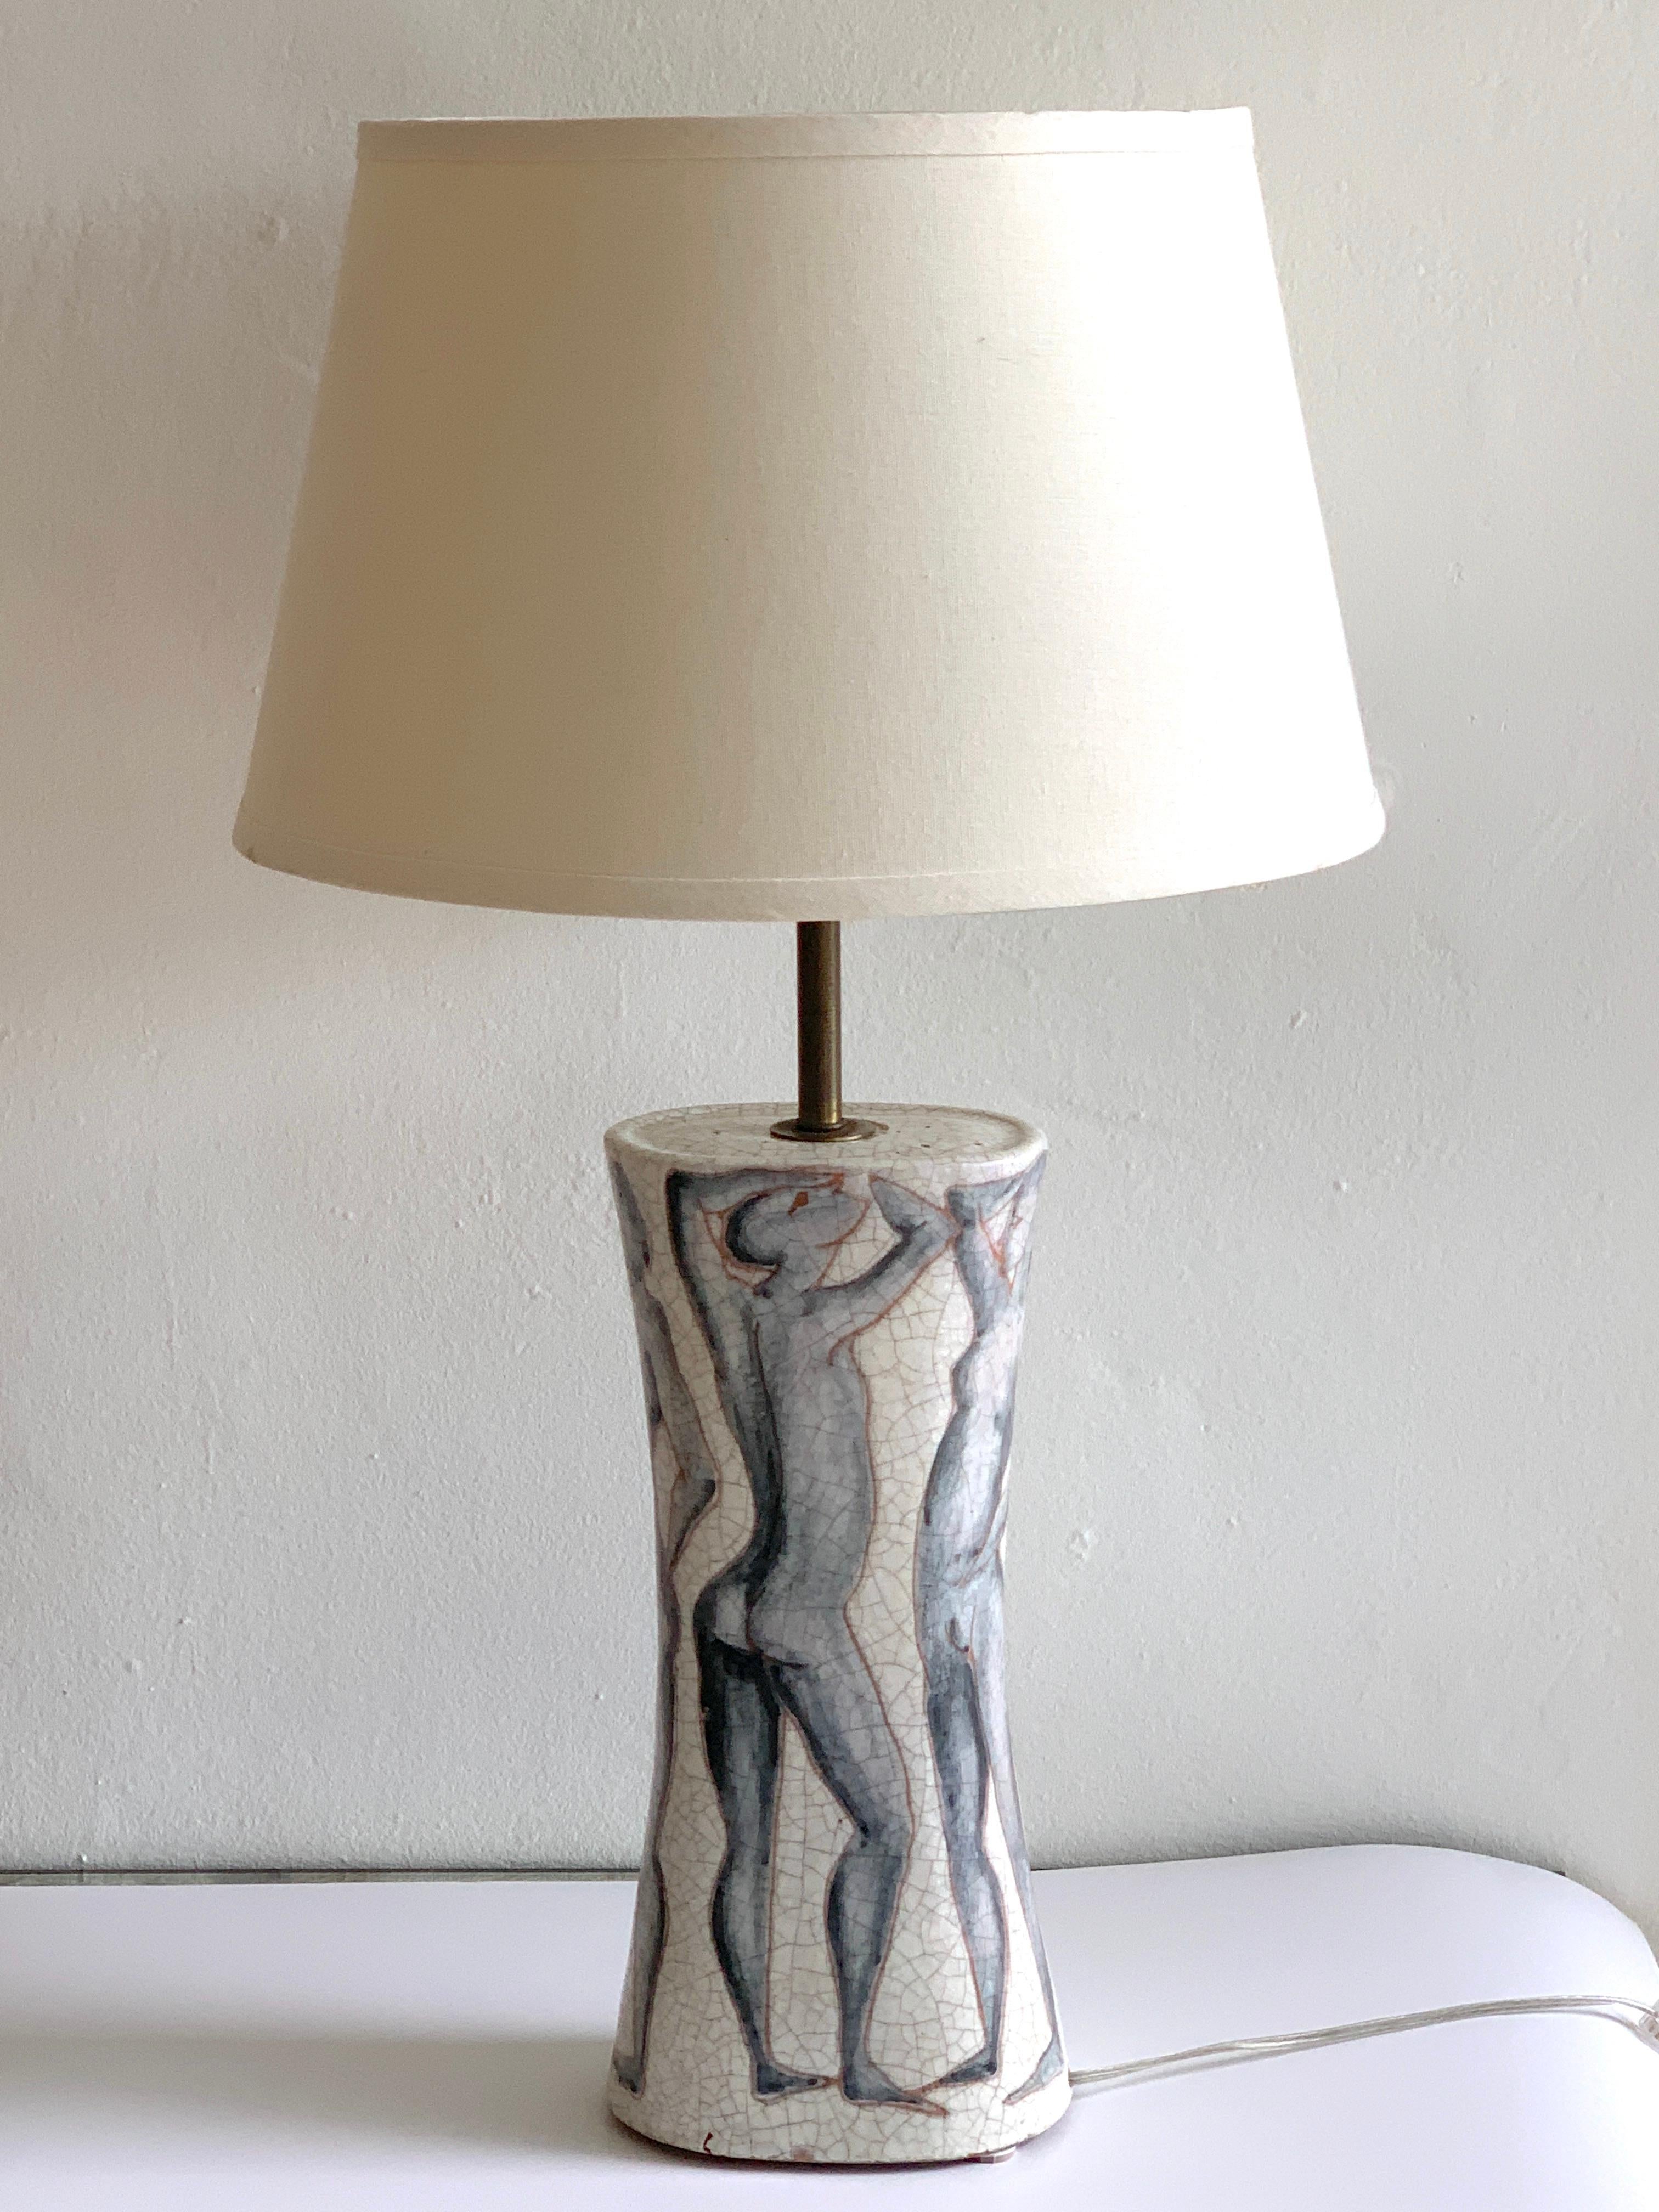 Marcello Fantoni for Raymor 'Nudes' lamp, with painted continuous full figure nudes, fitted with brass stem and white glass torchiere style shade ( glass shade is included)
28